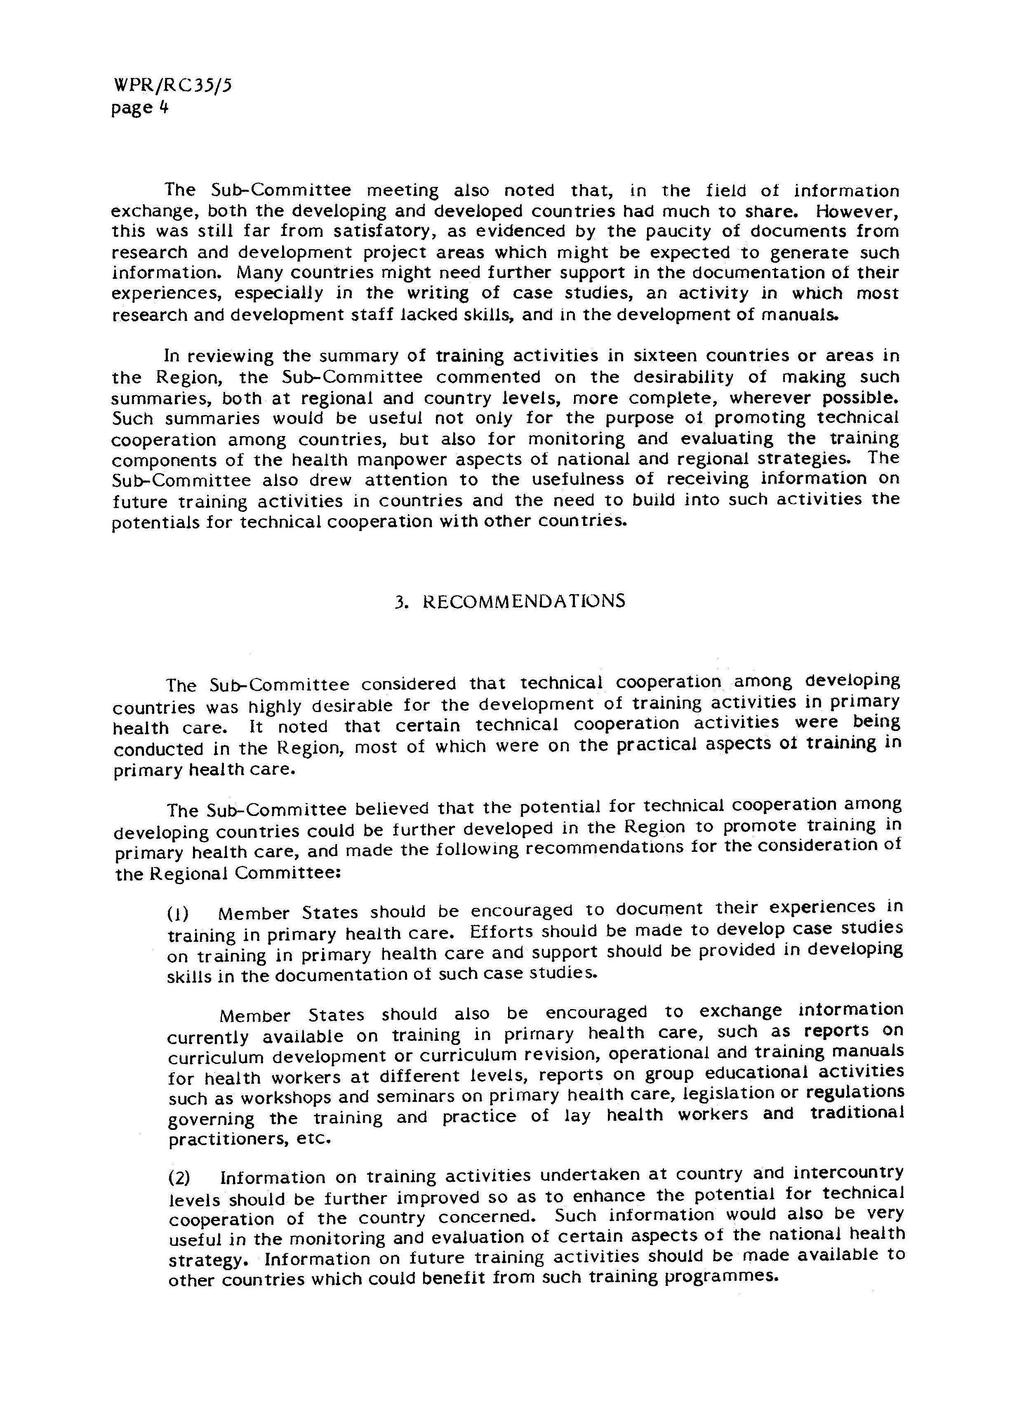 WPRjRC35/5 page 4 The Sub-Committee meeting also noted that, in the field of information exchange, both the developing and developed countries had much to share.